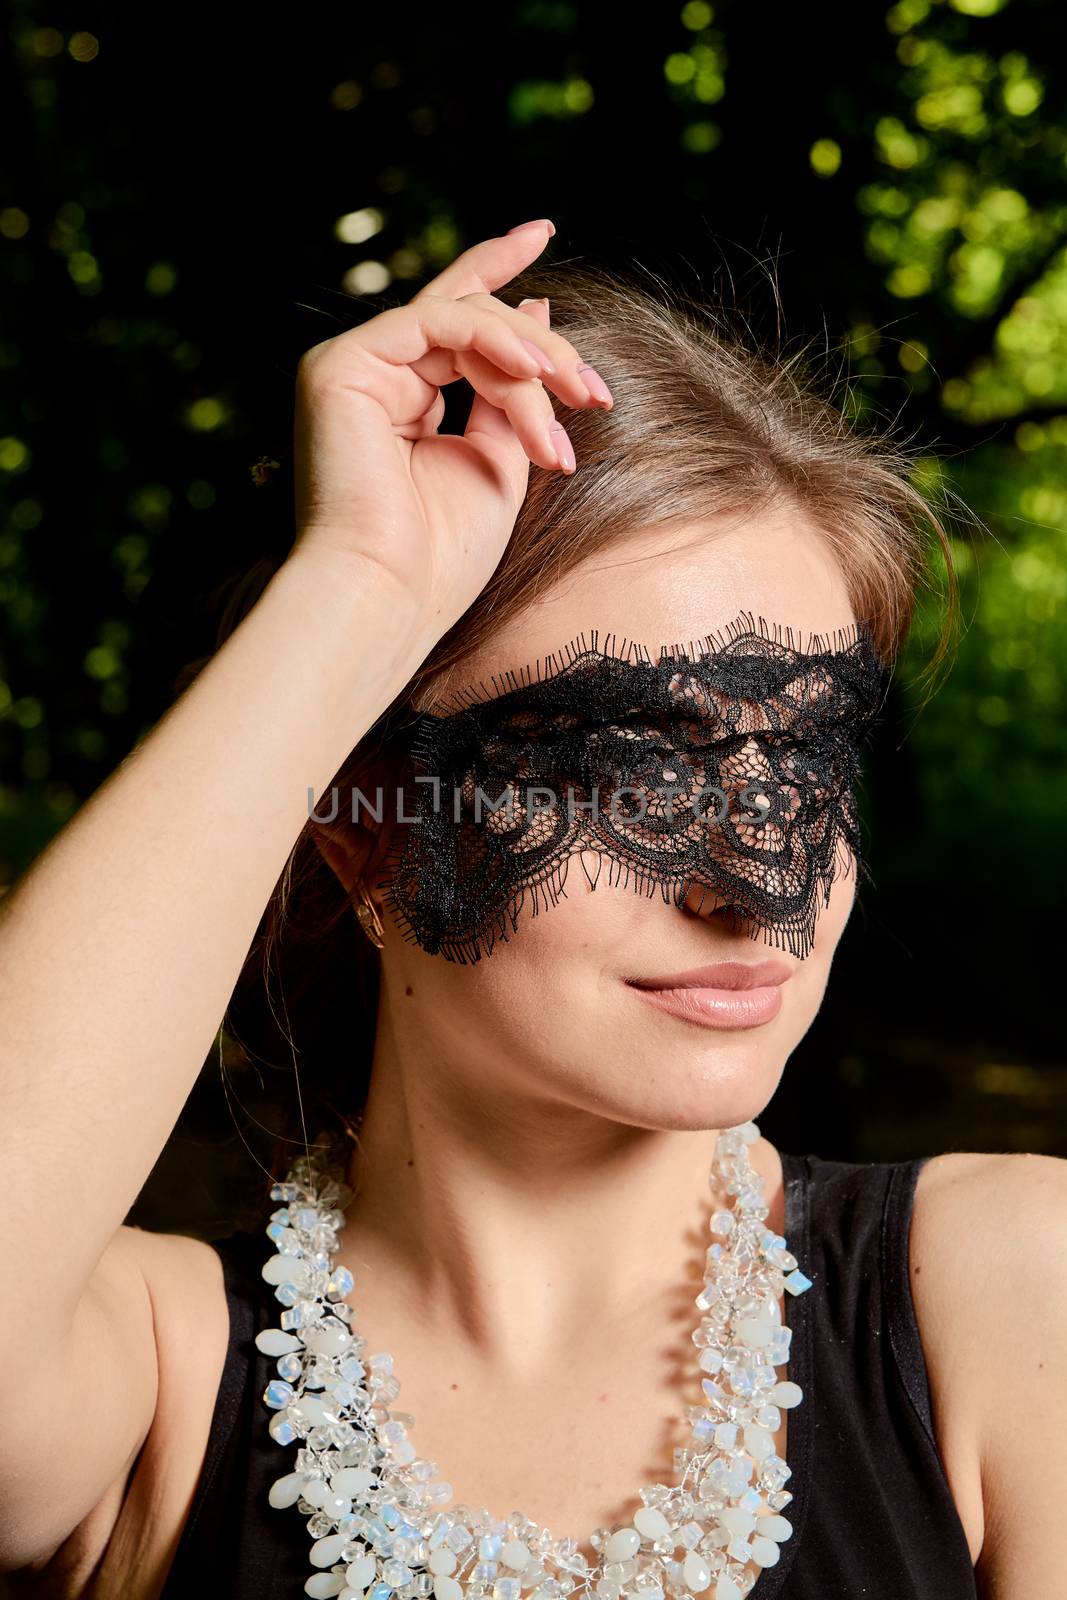 Young attractive woman in the sexy see-through, transparent, transpicuous, diaphanous, clear black dress and black lace masquerade venetian face mask posing outdoor at the green alley in the old park.